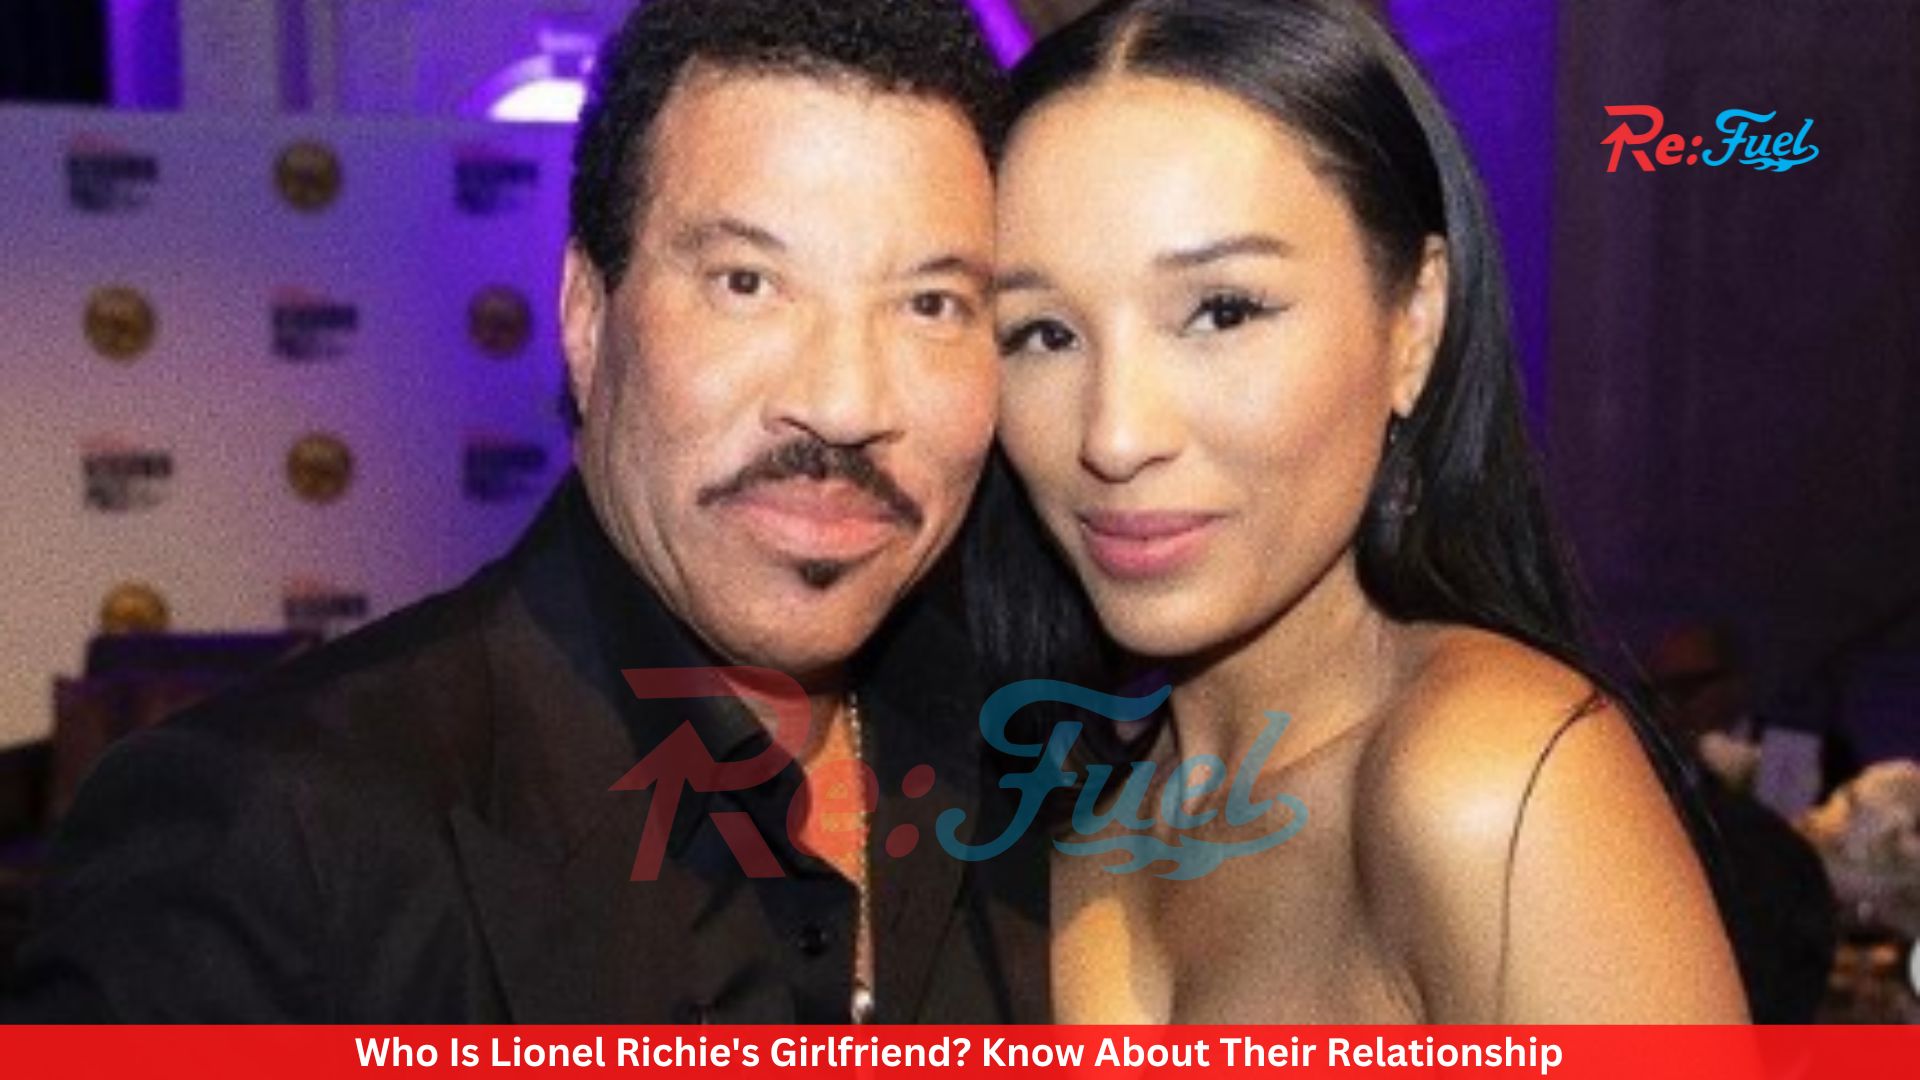 Who Is Lionel Richie's Girlfriend? Know About Their Relationship